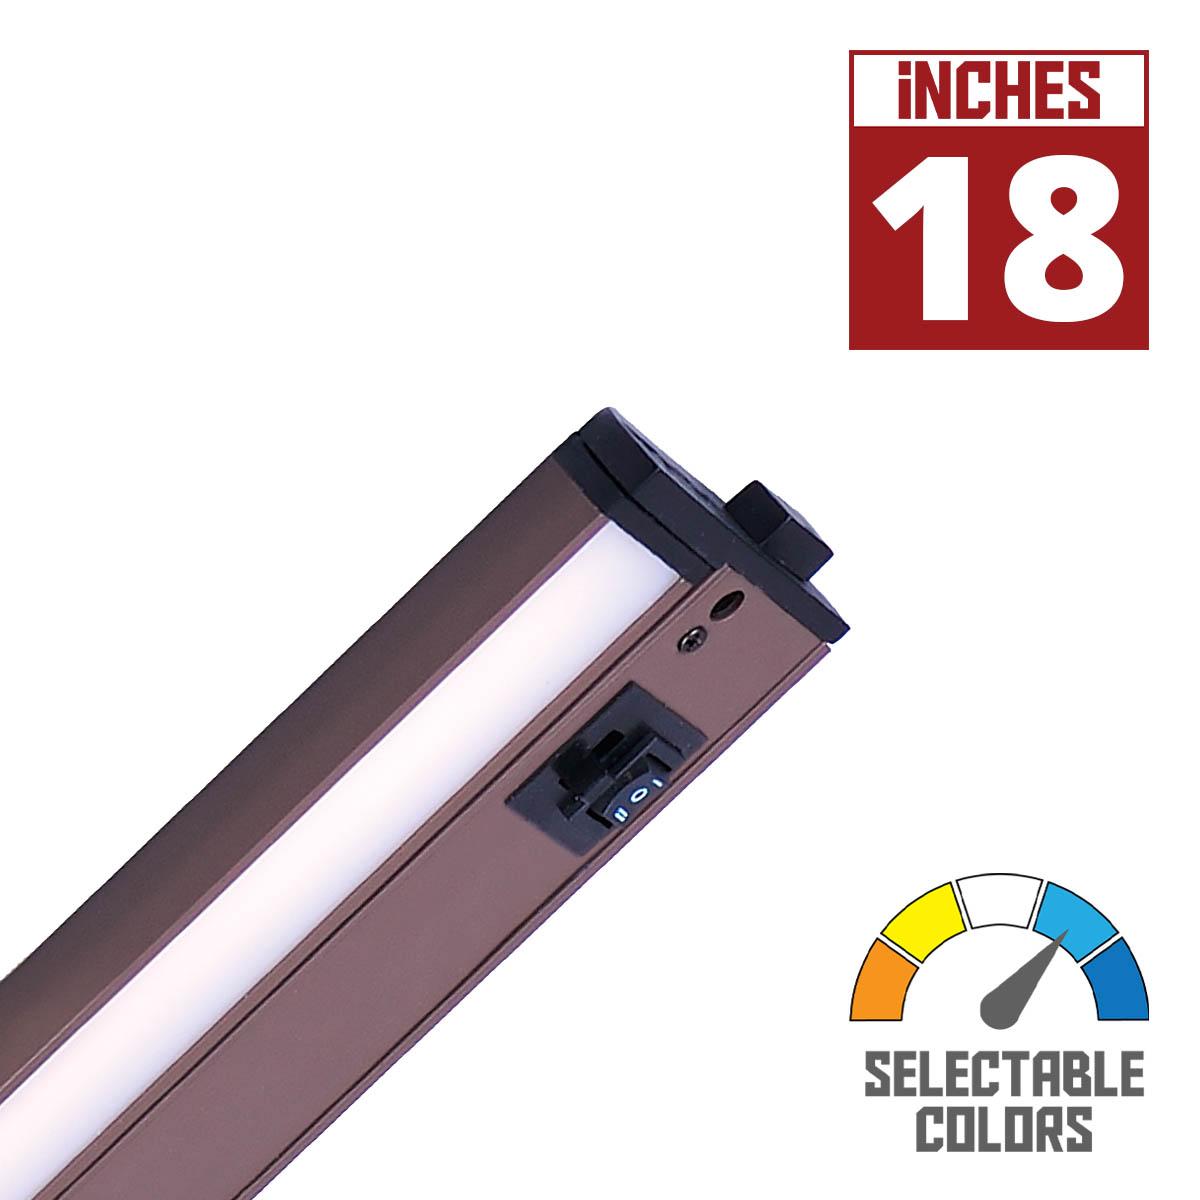 CounterMax 5K 18 Inch Under Cabinet LED Light with Patent gimbals, 1200 Lumens, Linkable, CCT Selectable 2700K to 5000K, 120V - Bees Lighting